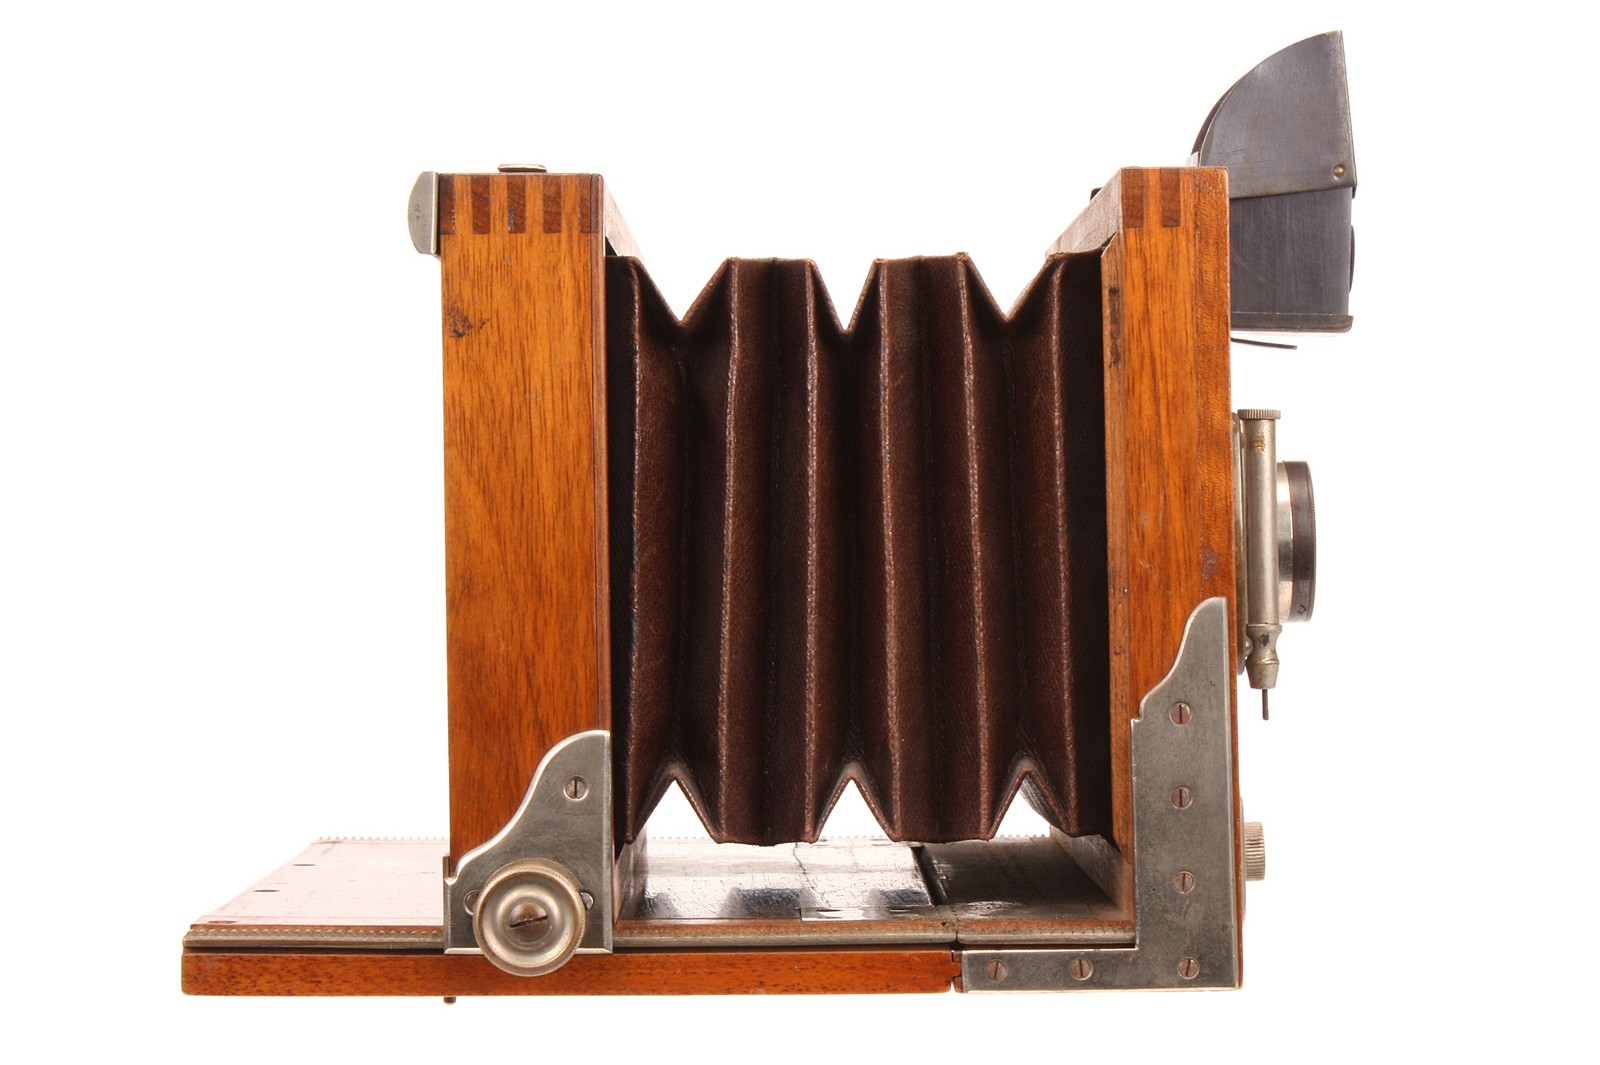 A Charles Mendel Mahogany Stereo Tailboard Camera, 9x18cm, with Panoramique Extra Rapid aluminium - Image 4 of 5